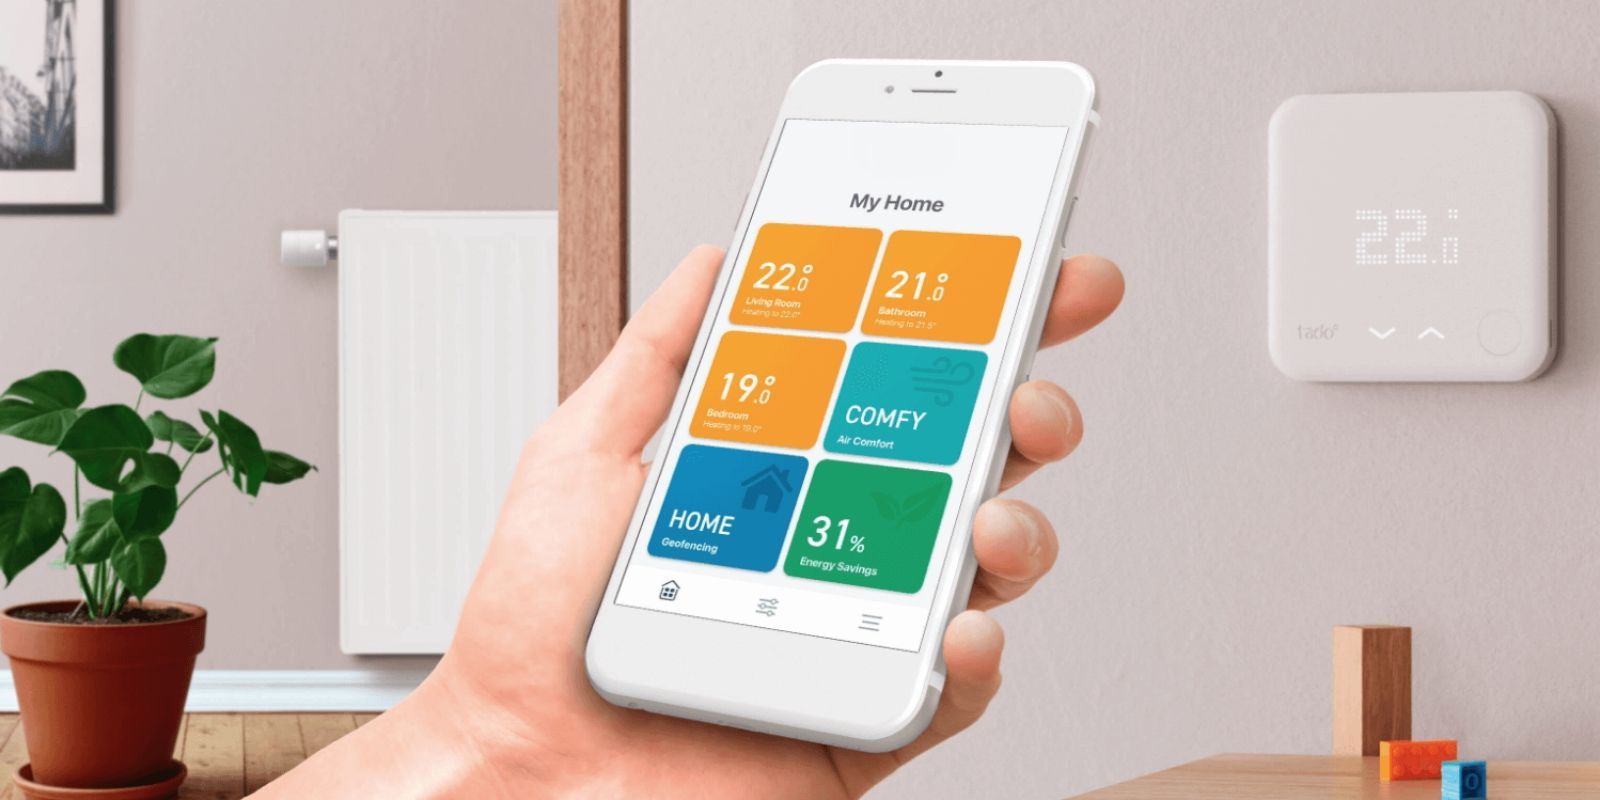 smart thermostat security alarm systems cornerstone protection